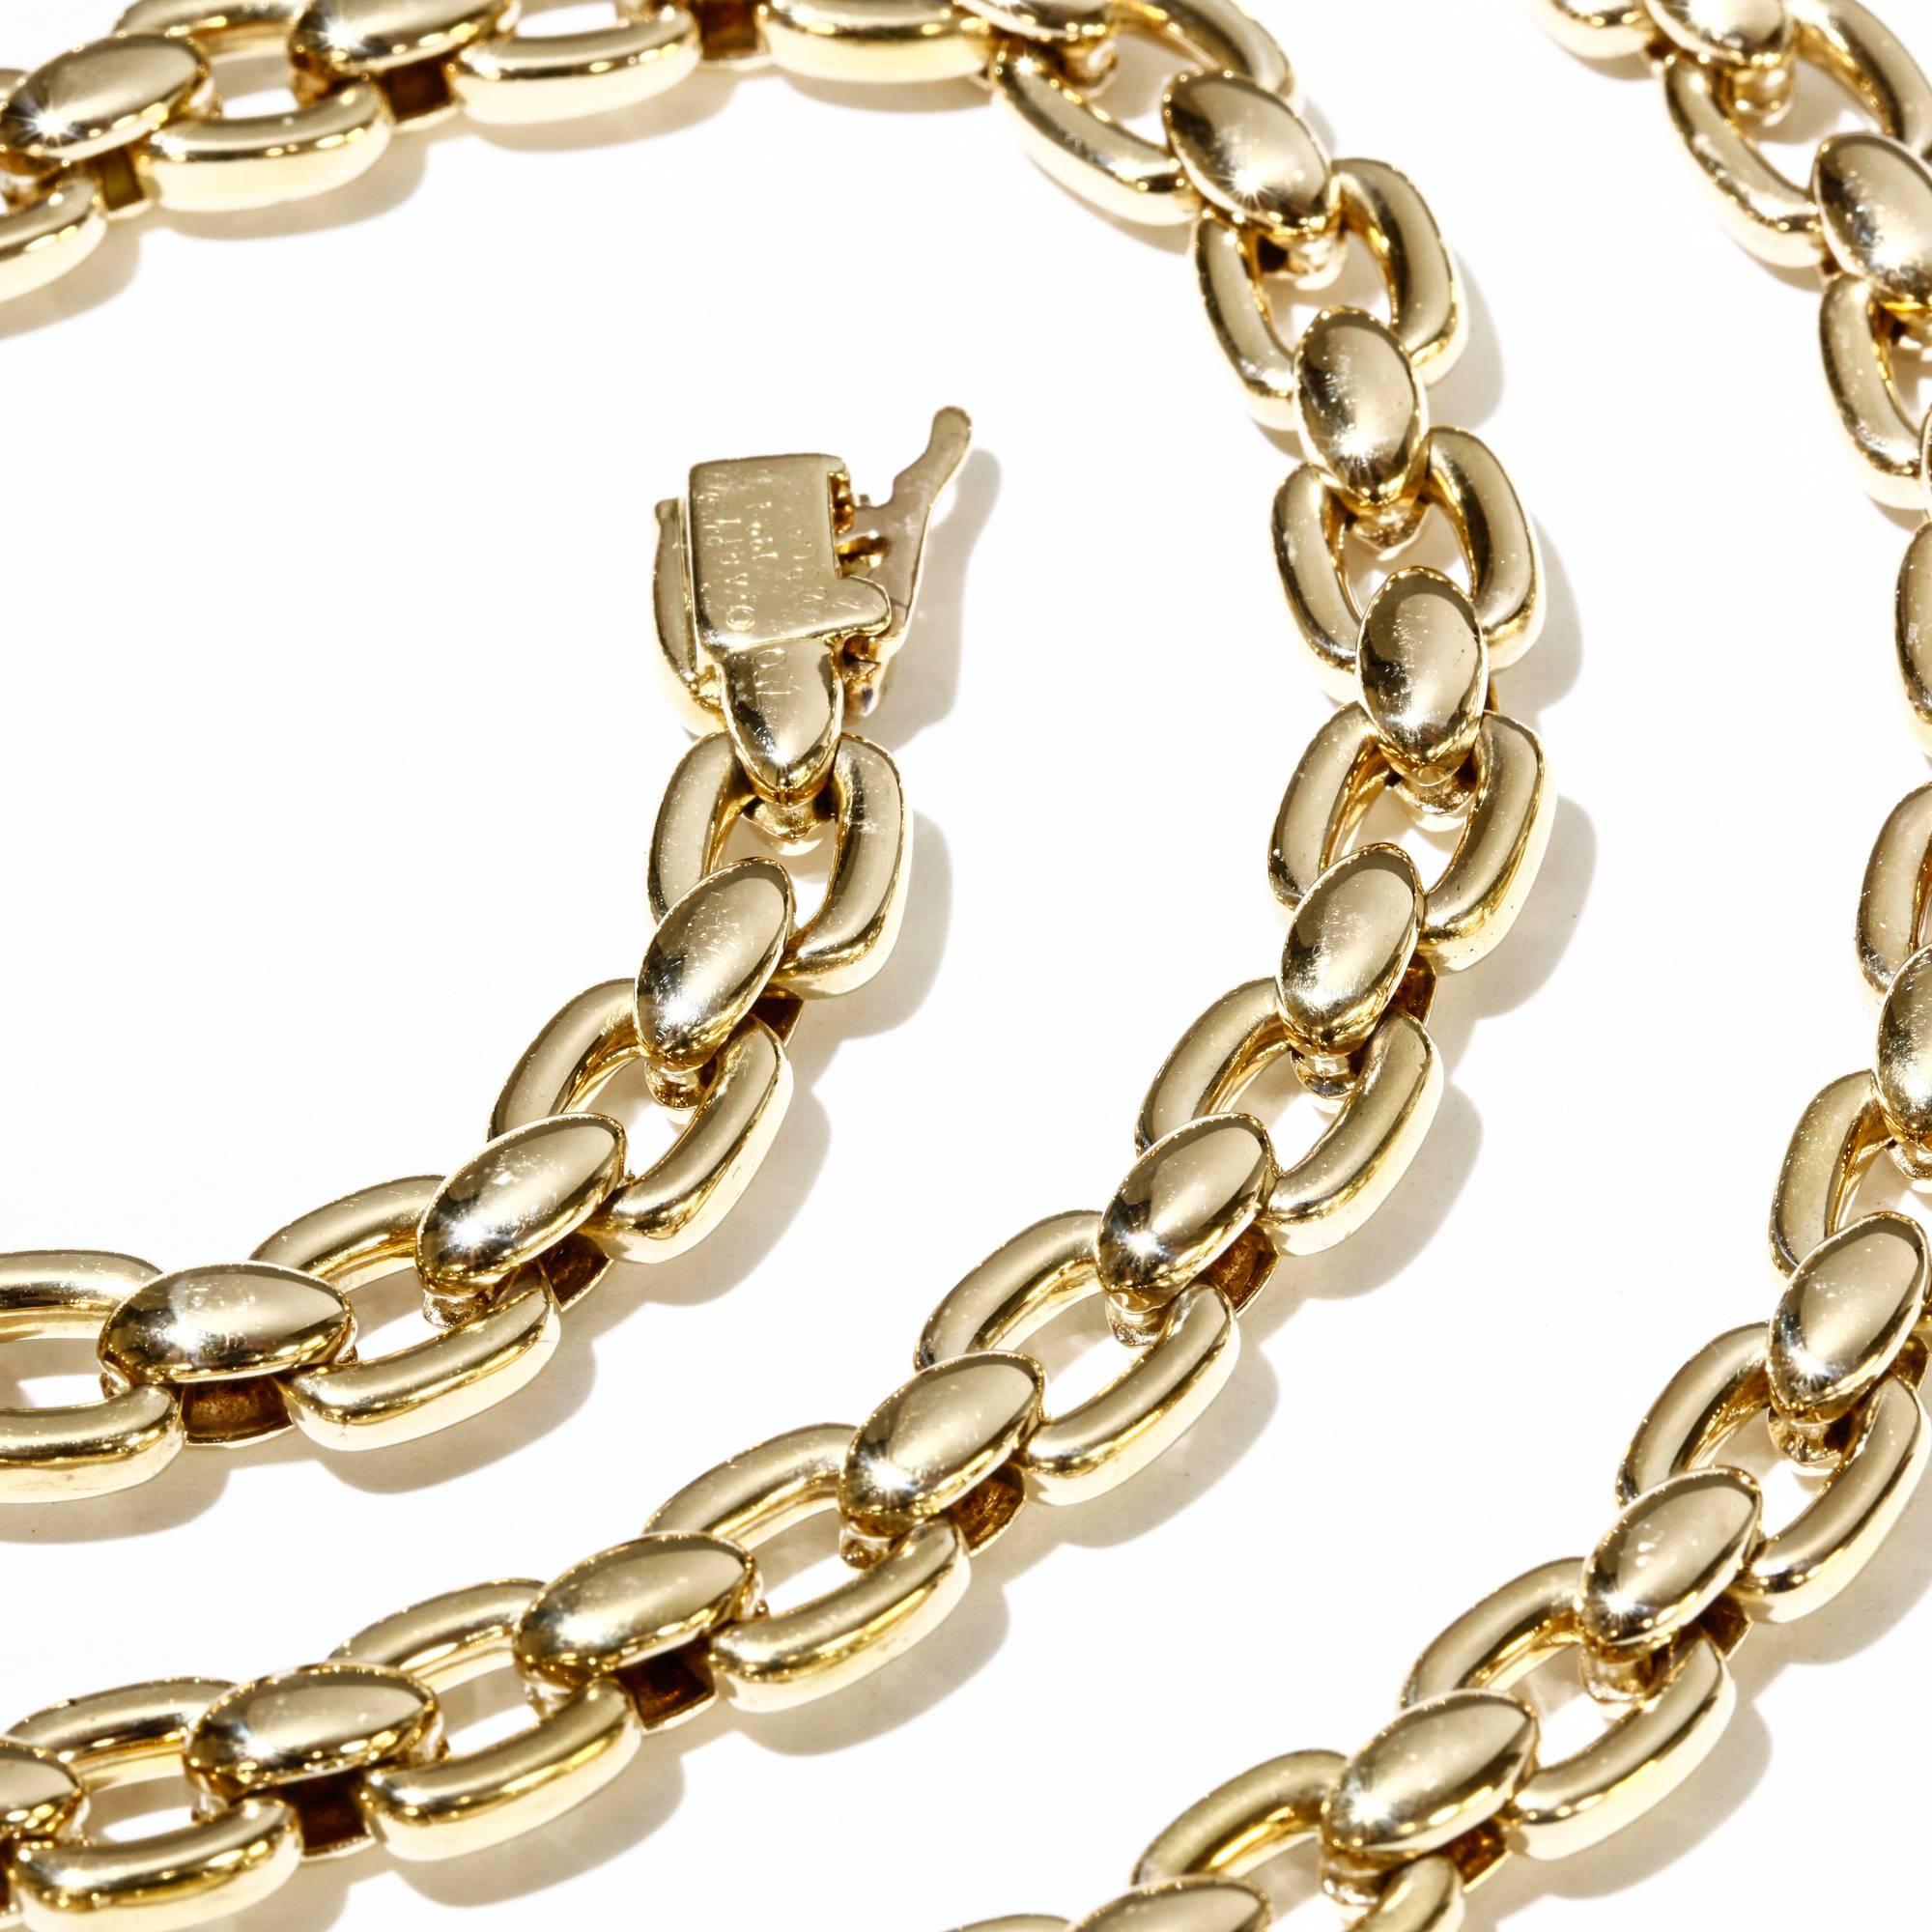 This vintage Cartier link necklace is solid 18k yellow gold and measures 23 inches long. All Cartier engraving is intact. It was made in 1991. It shows very minor signs of wear and has never been polished. 